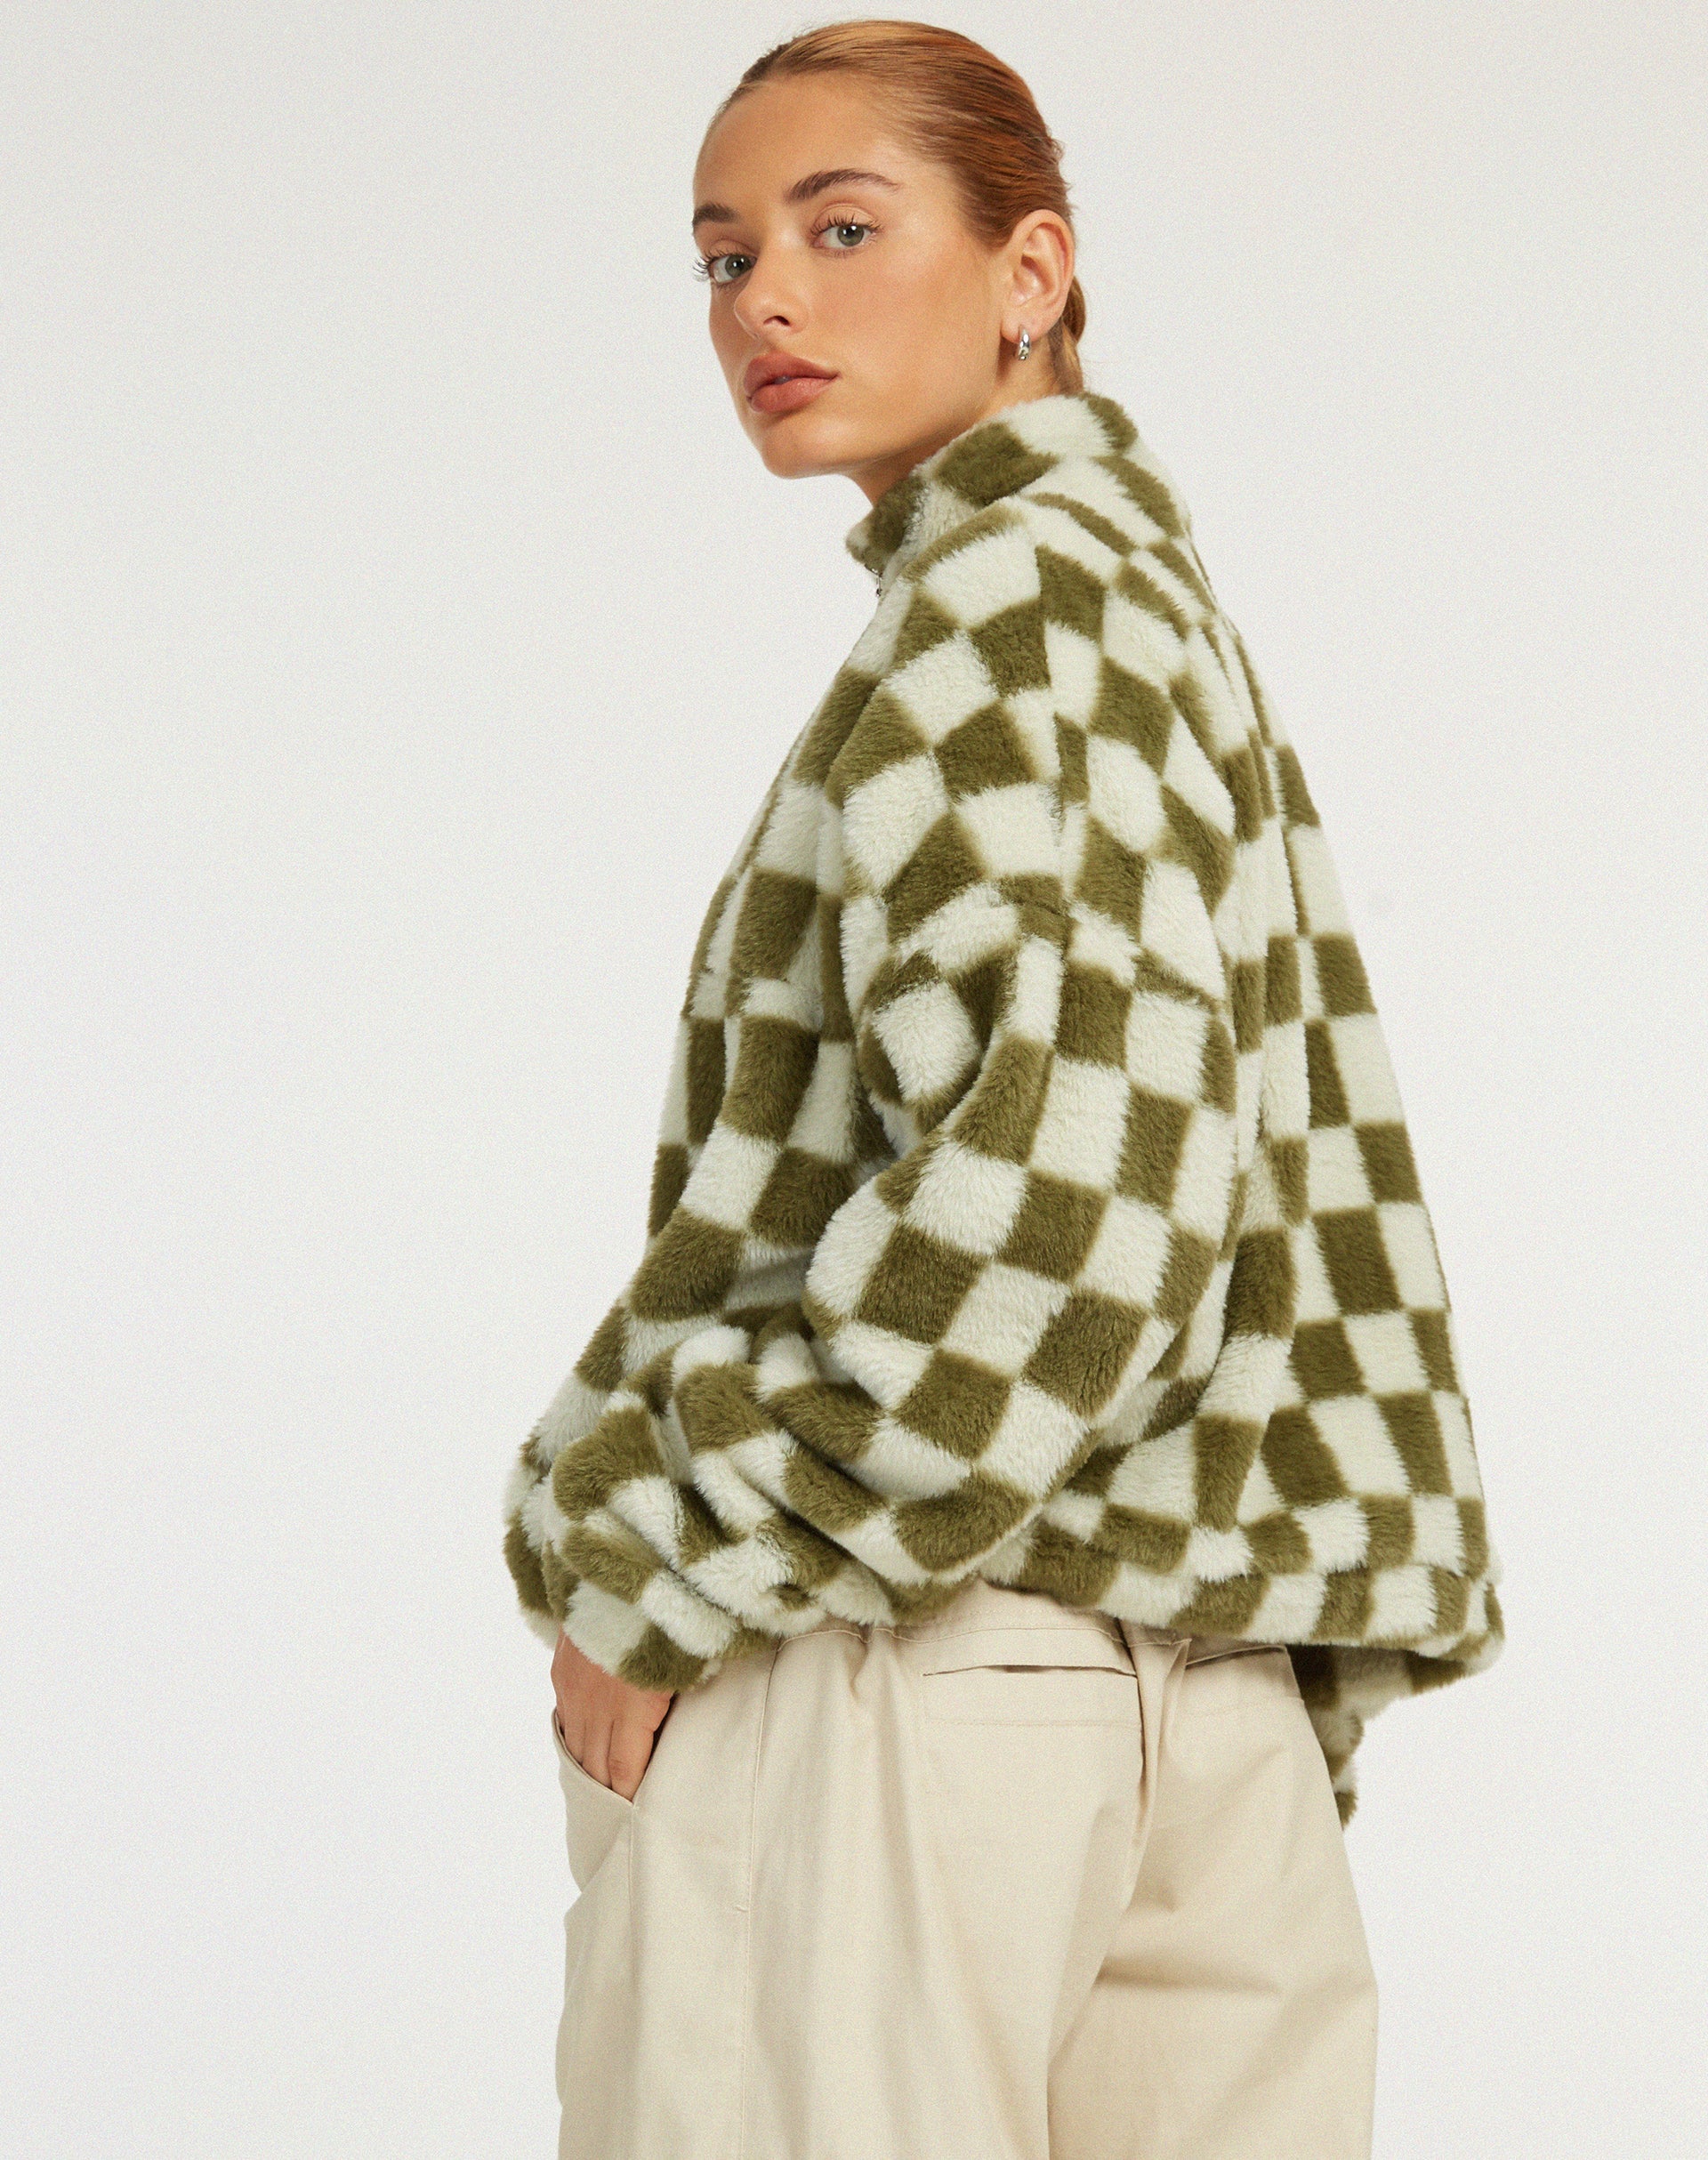 Image of Nero Jacket in Checkered Sage